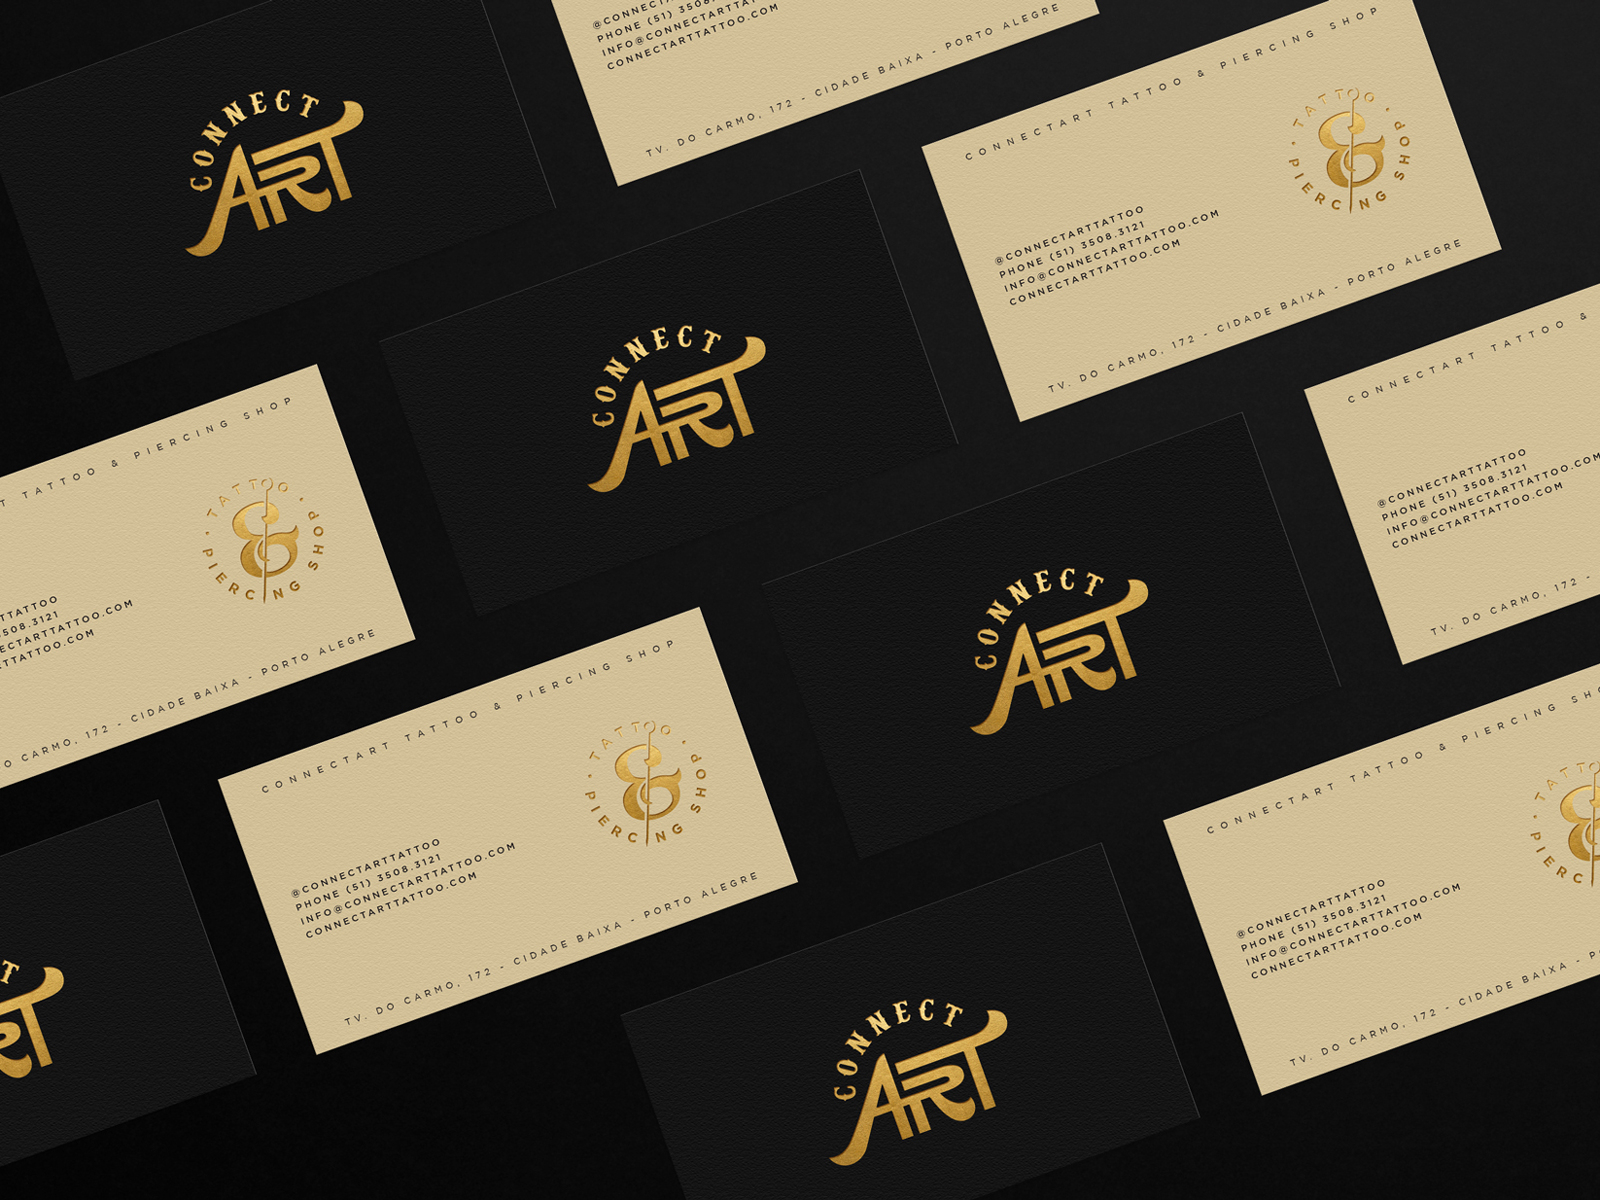 Modern Professional Tattoo Business Card Design for a Company by  ideaz2050  Design 4050039